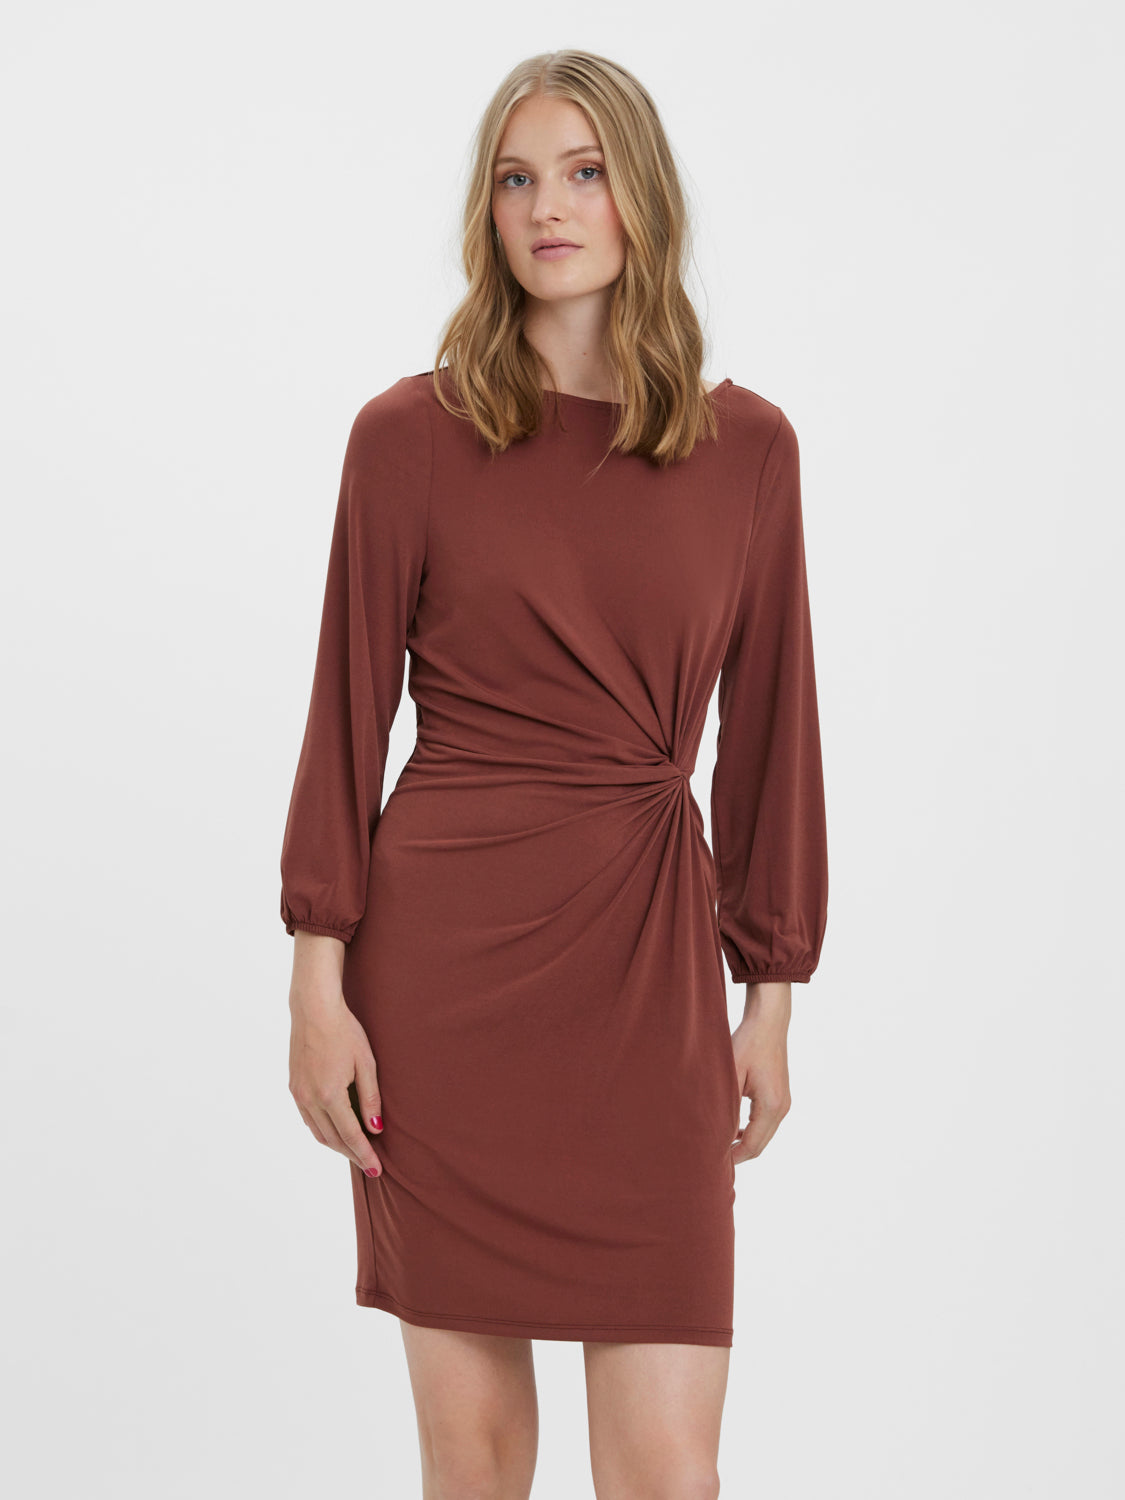 VMTWISTED Dress - Sable